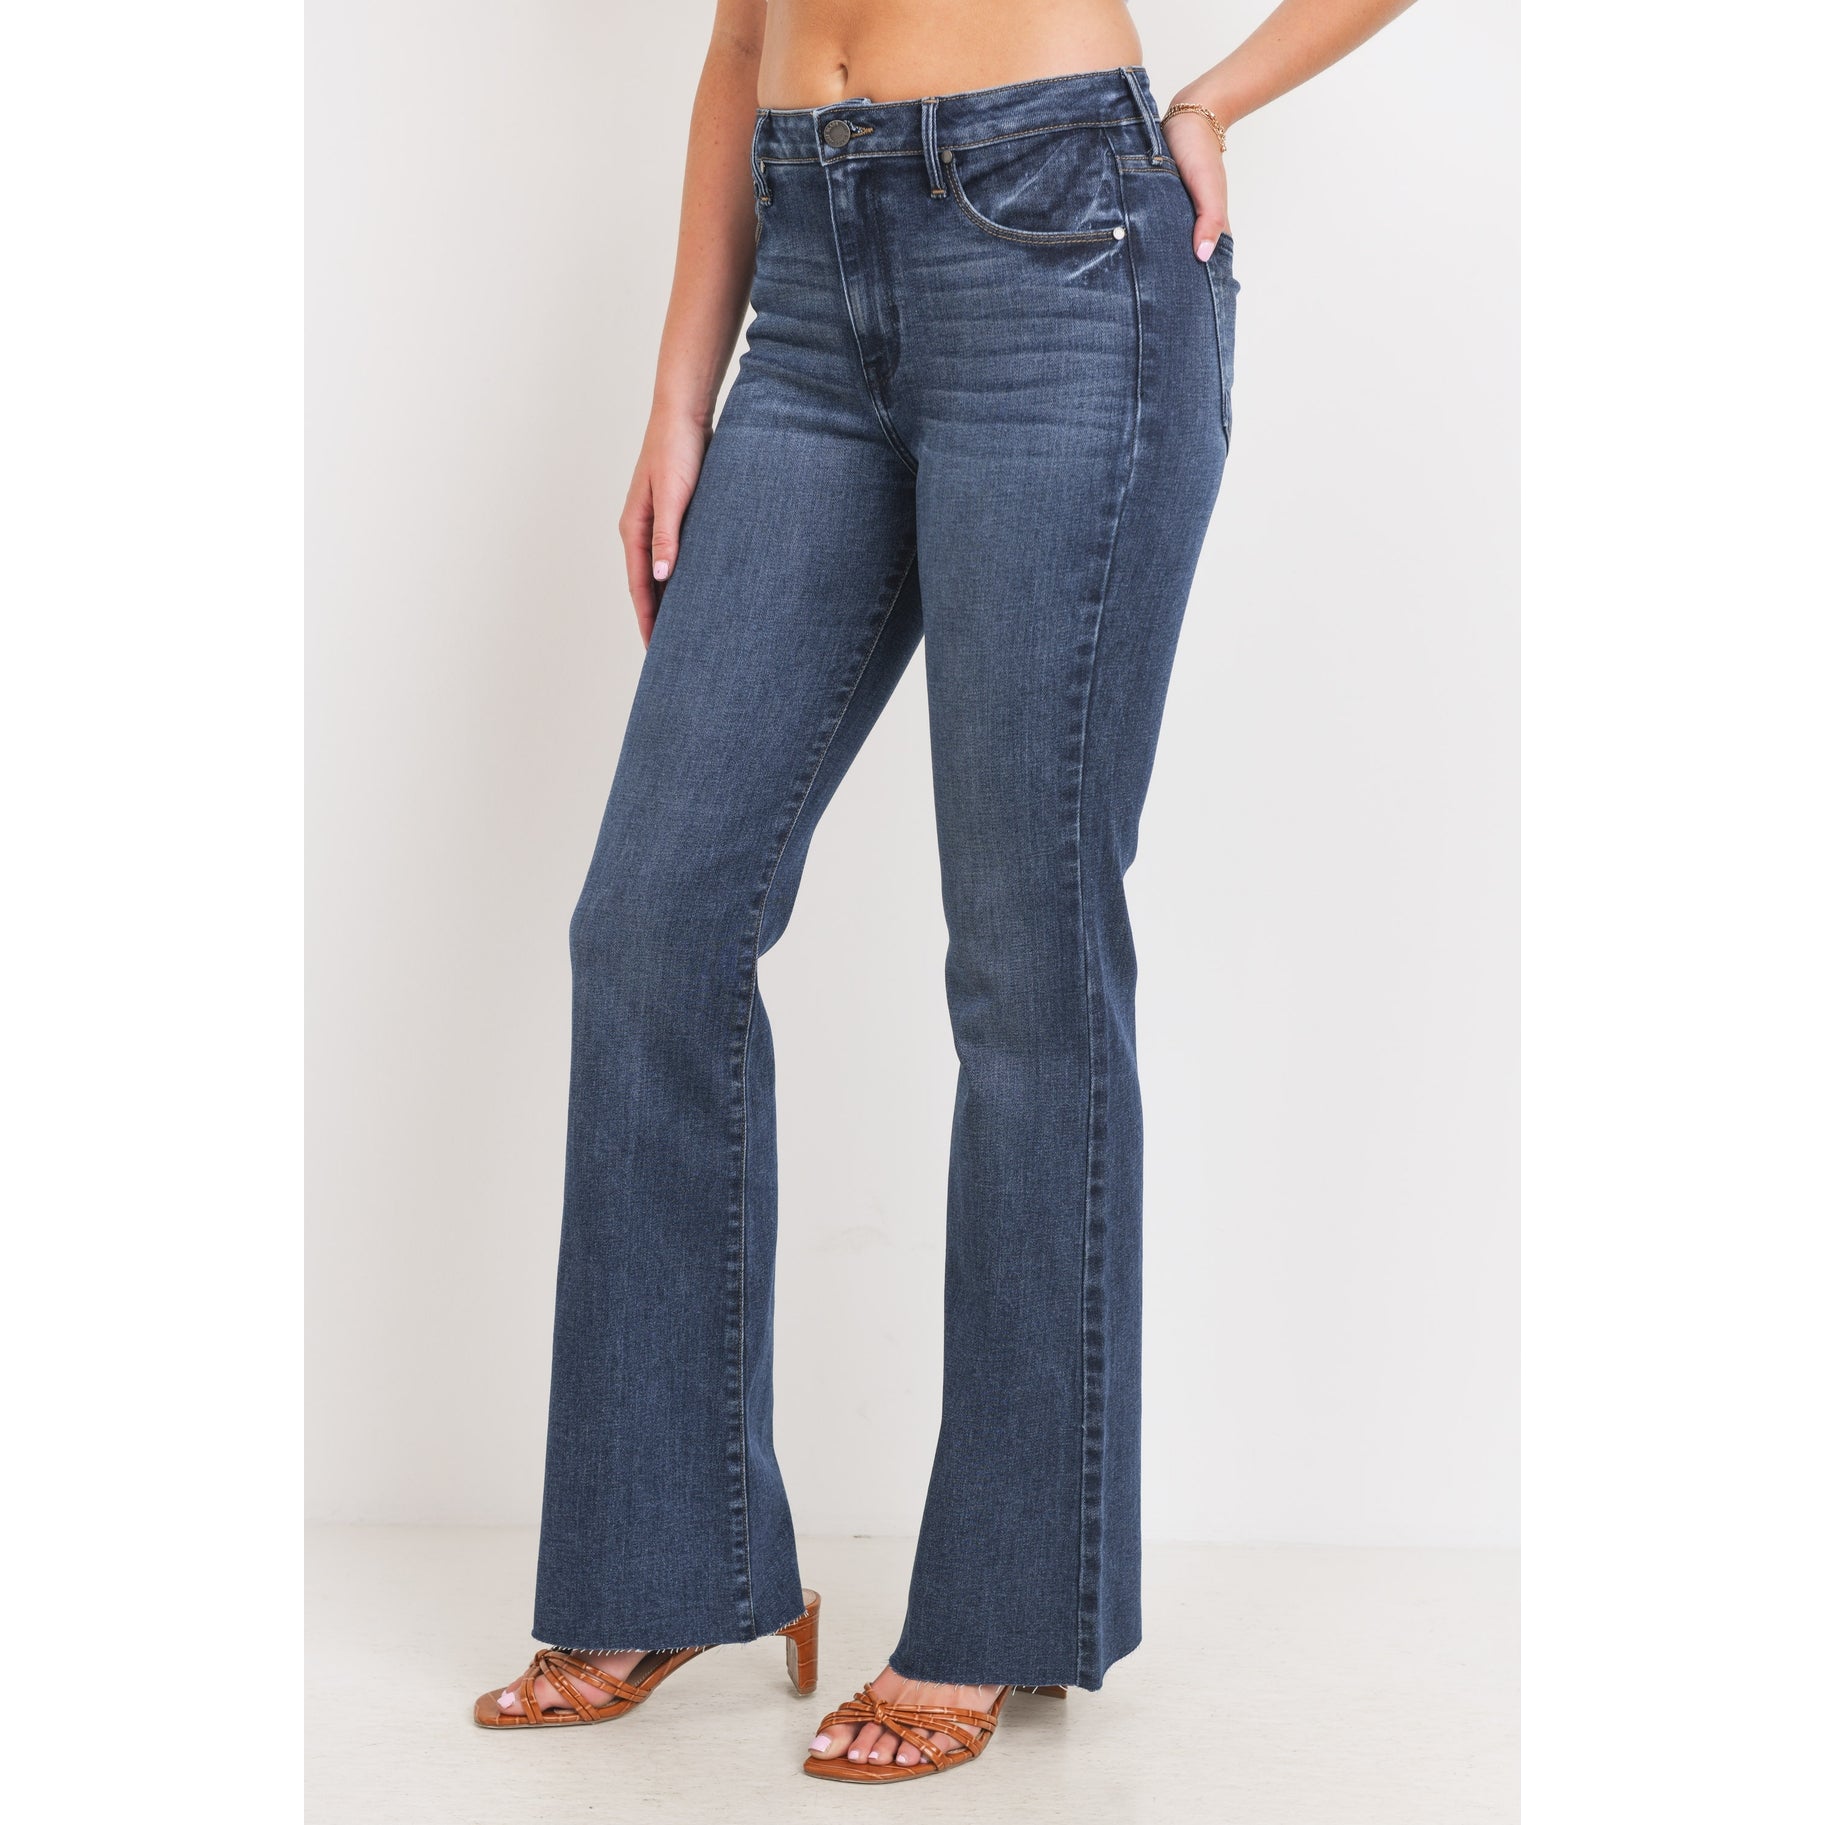 The Athena High Rise Flares by Just Black Denim